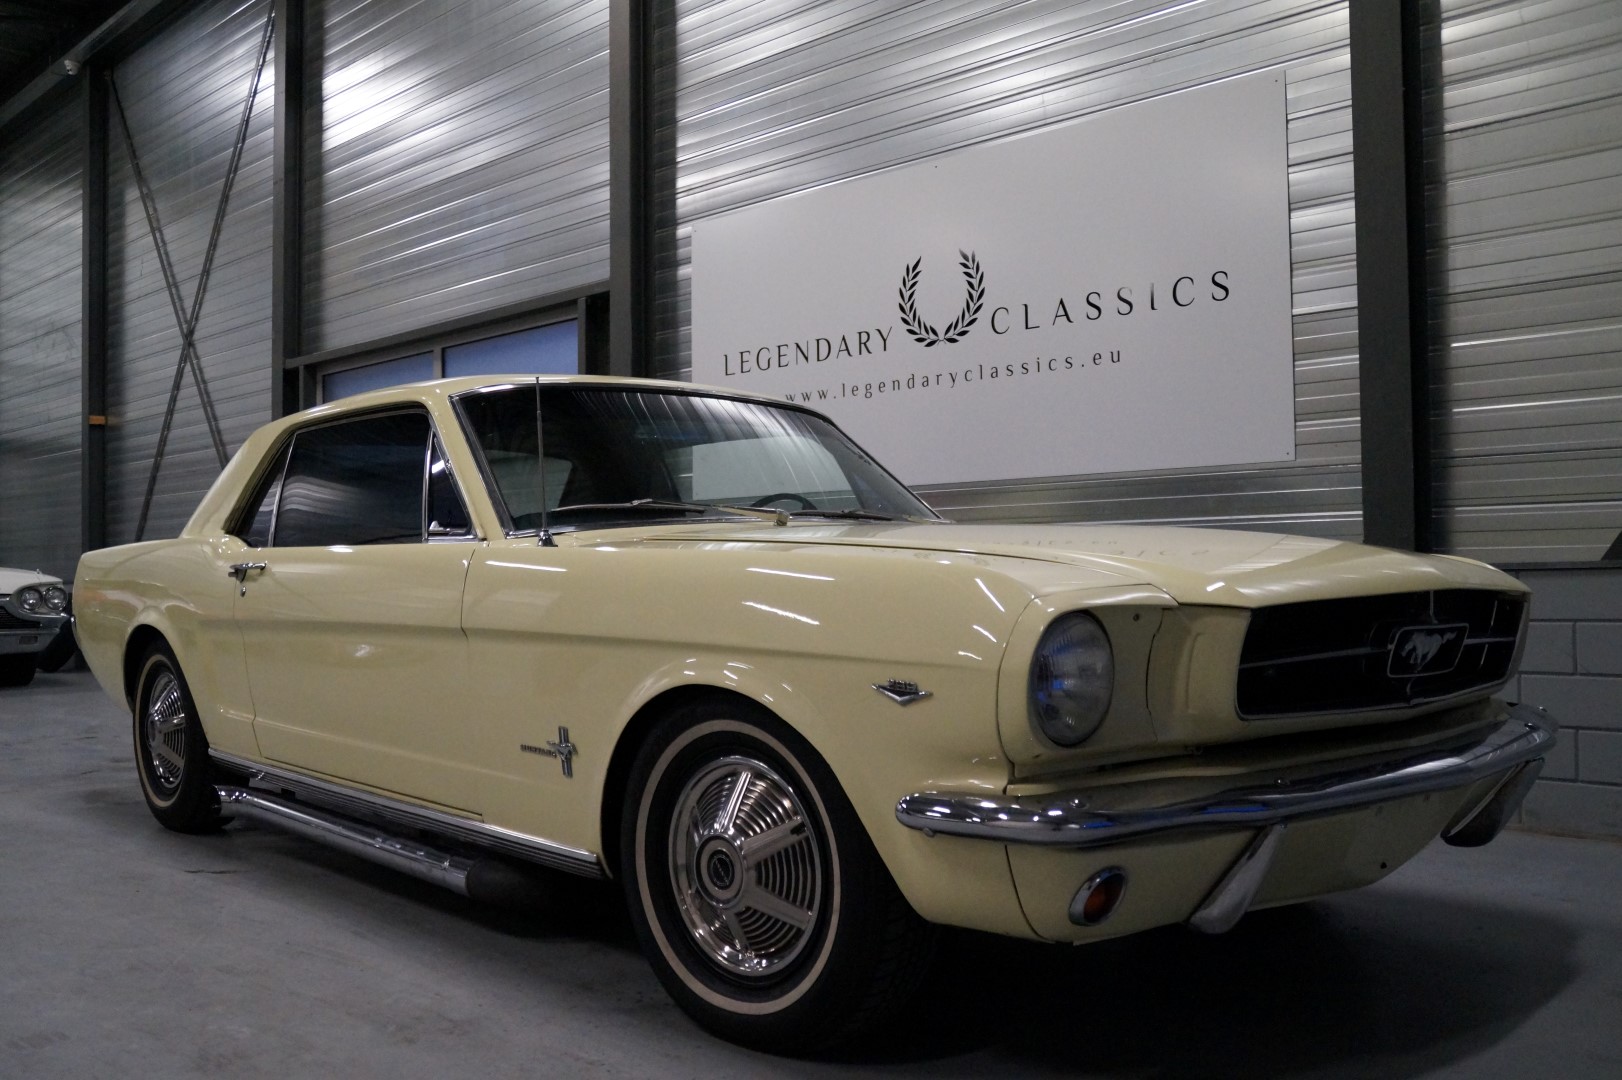 Buy this Ford Mustang   at Legendary Classics (1)